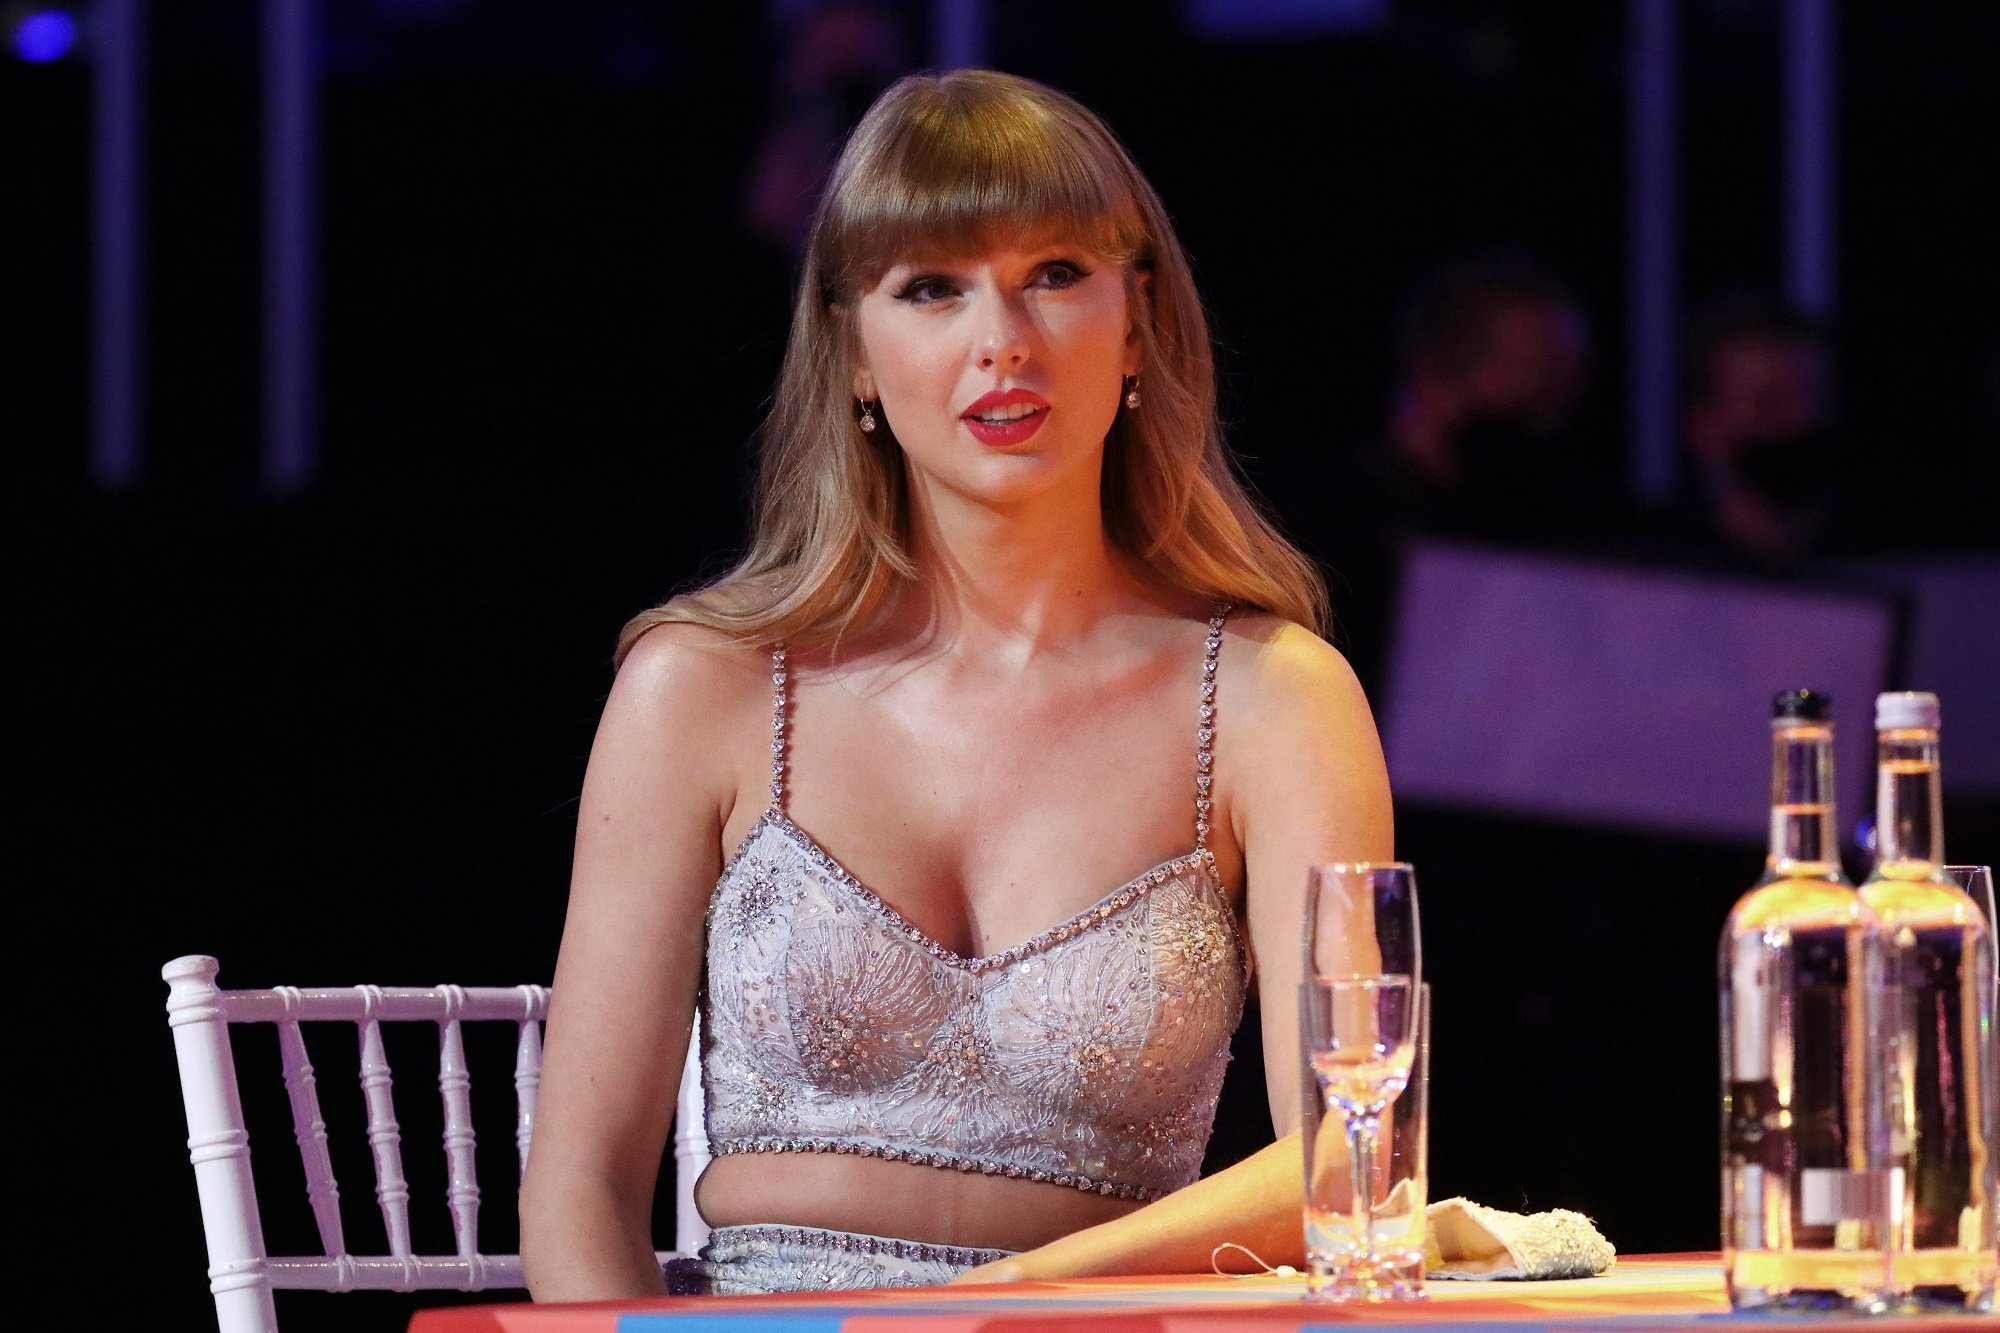 Taylor Swift wearing a sparkled outfit and seated at an event.